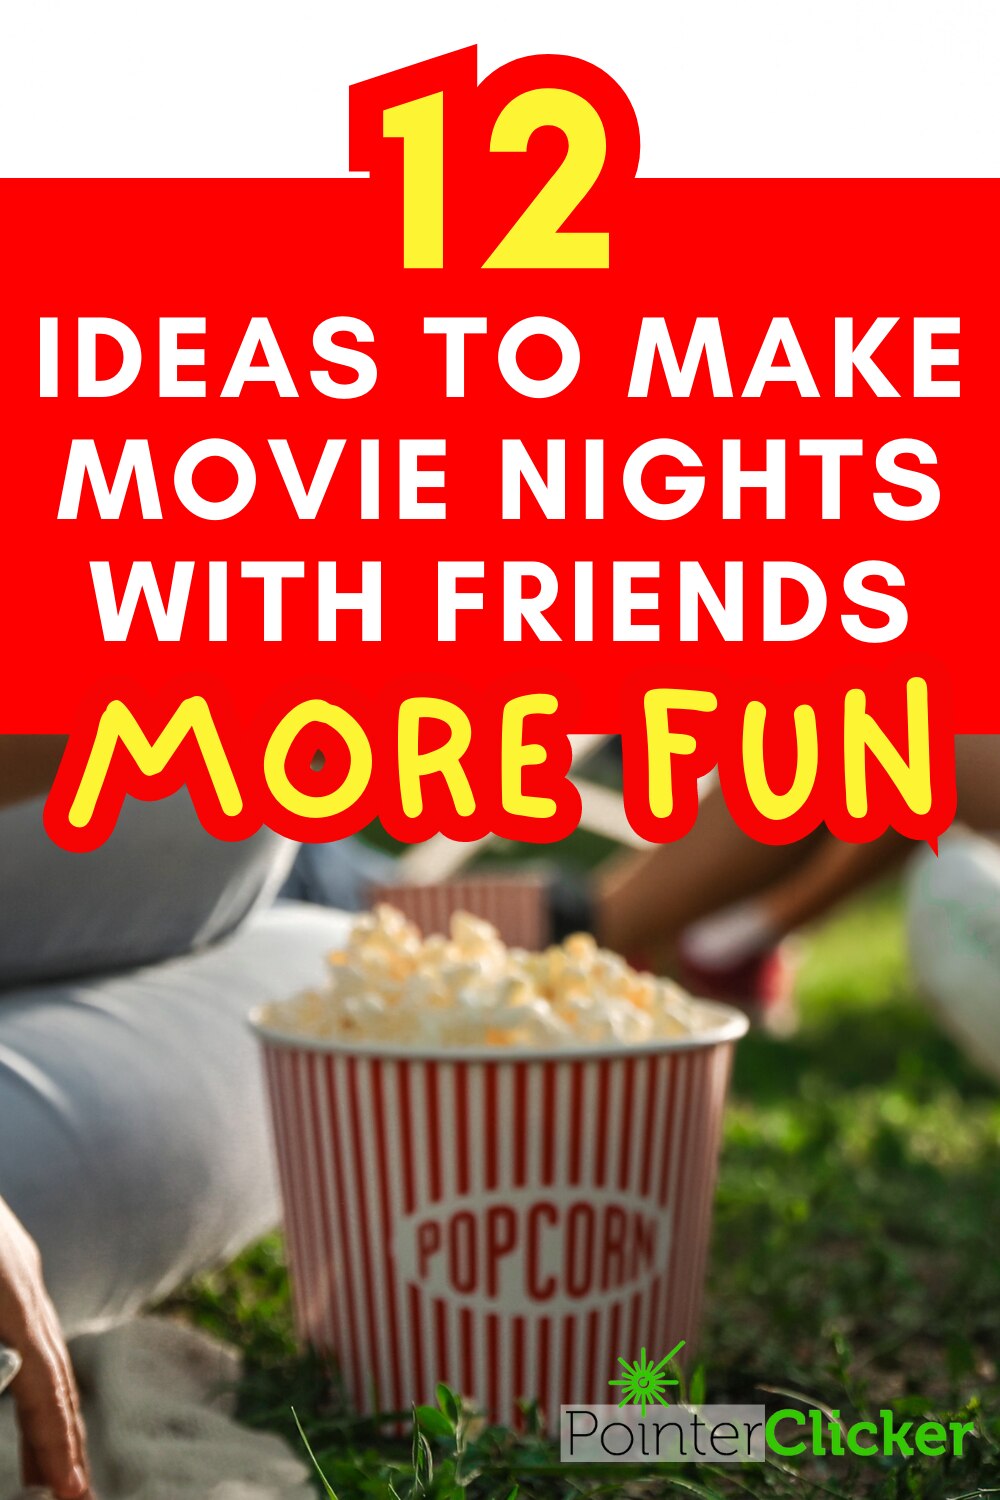 a cup filled with popcorn on the grass. And the words say '12 ideas to make movie nights with friends more fun'